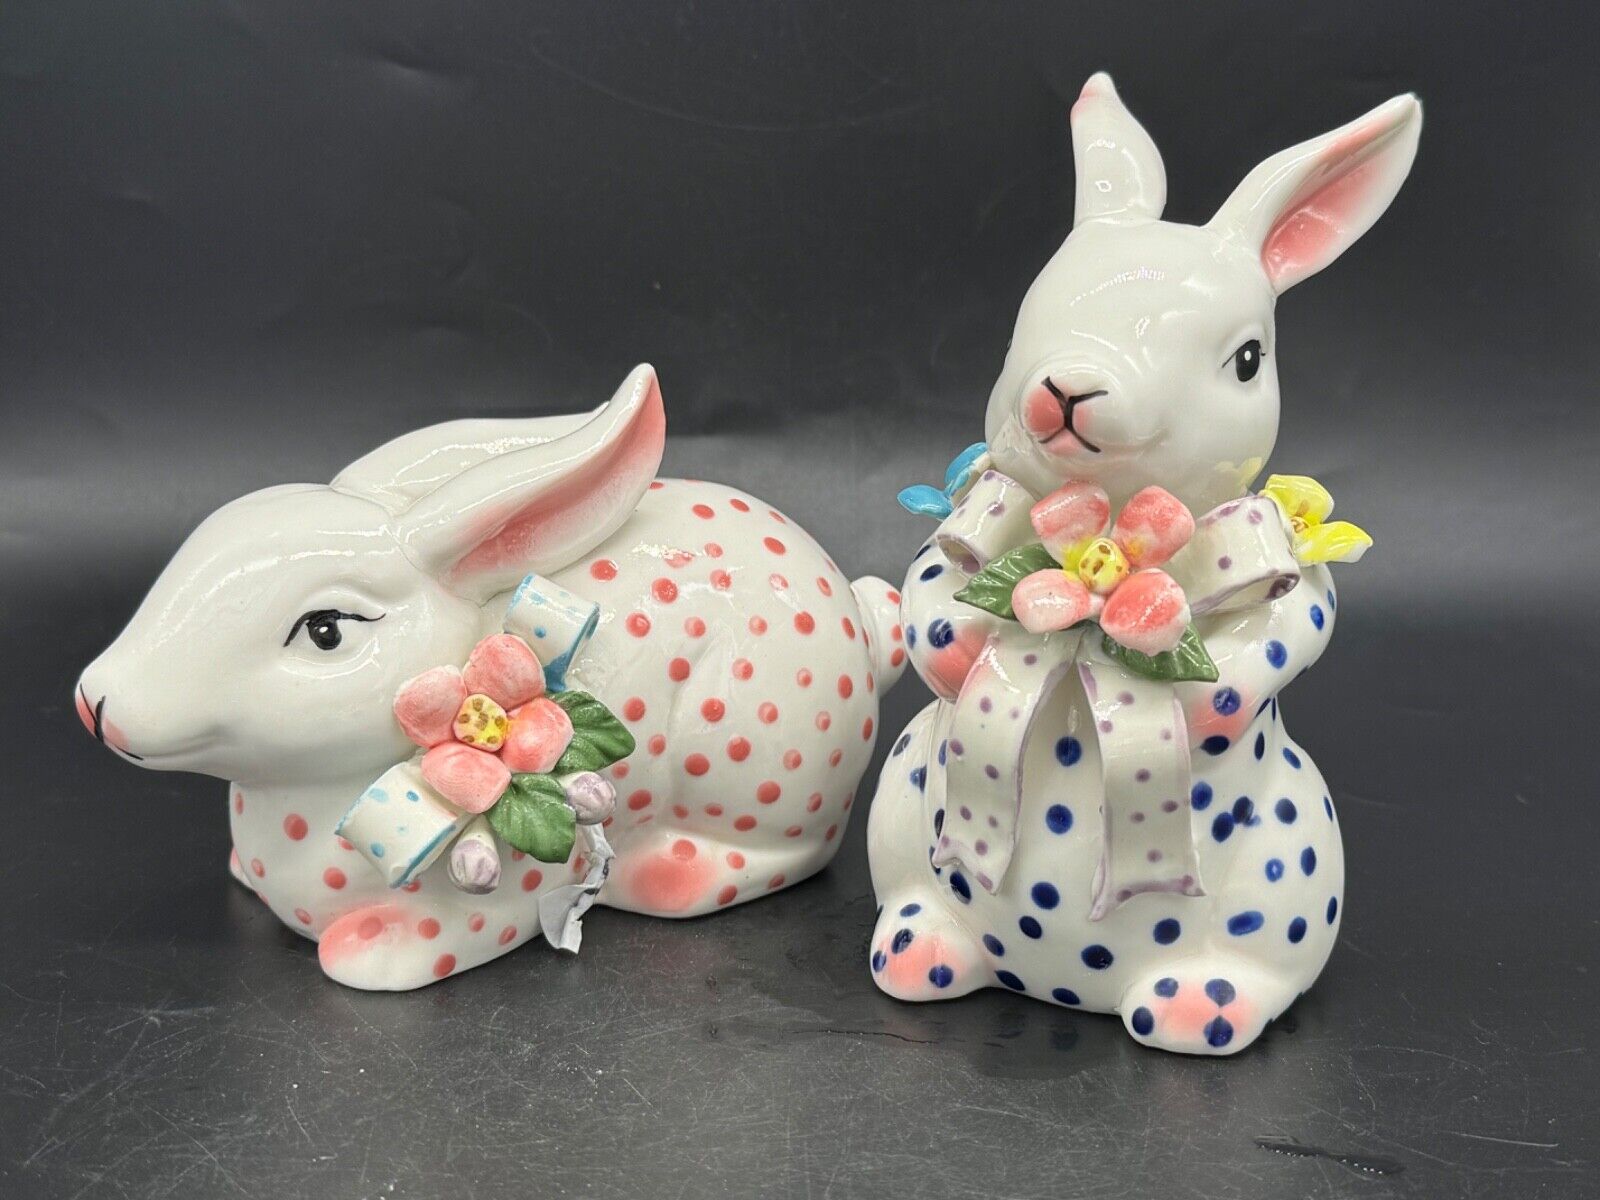 2 very cute, ceramic bunny figurines, decorated with flowers & dots